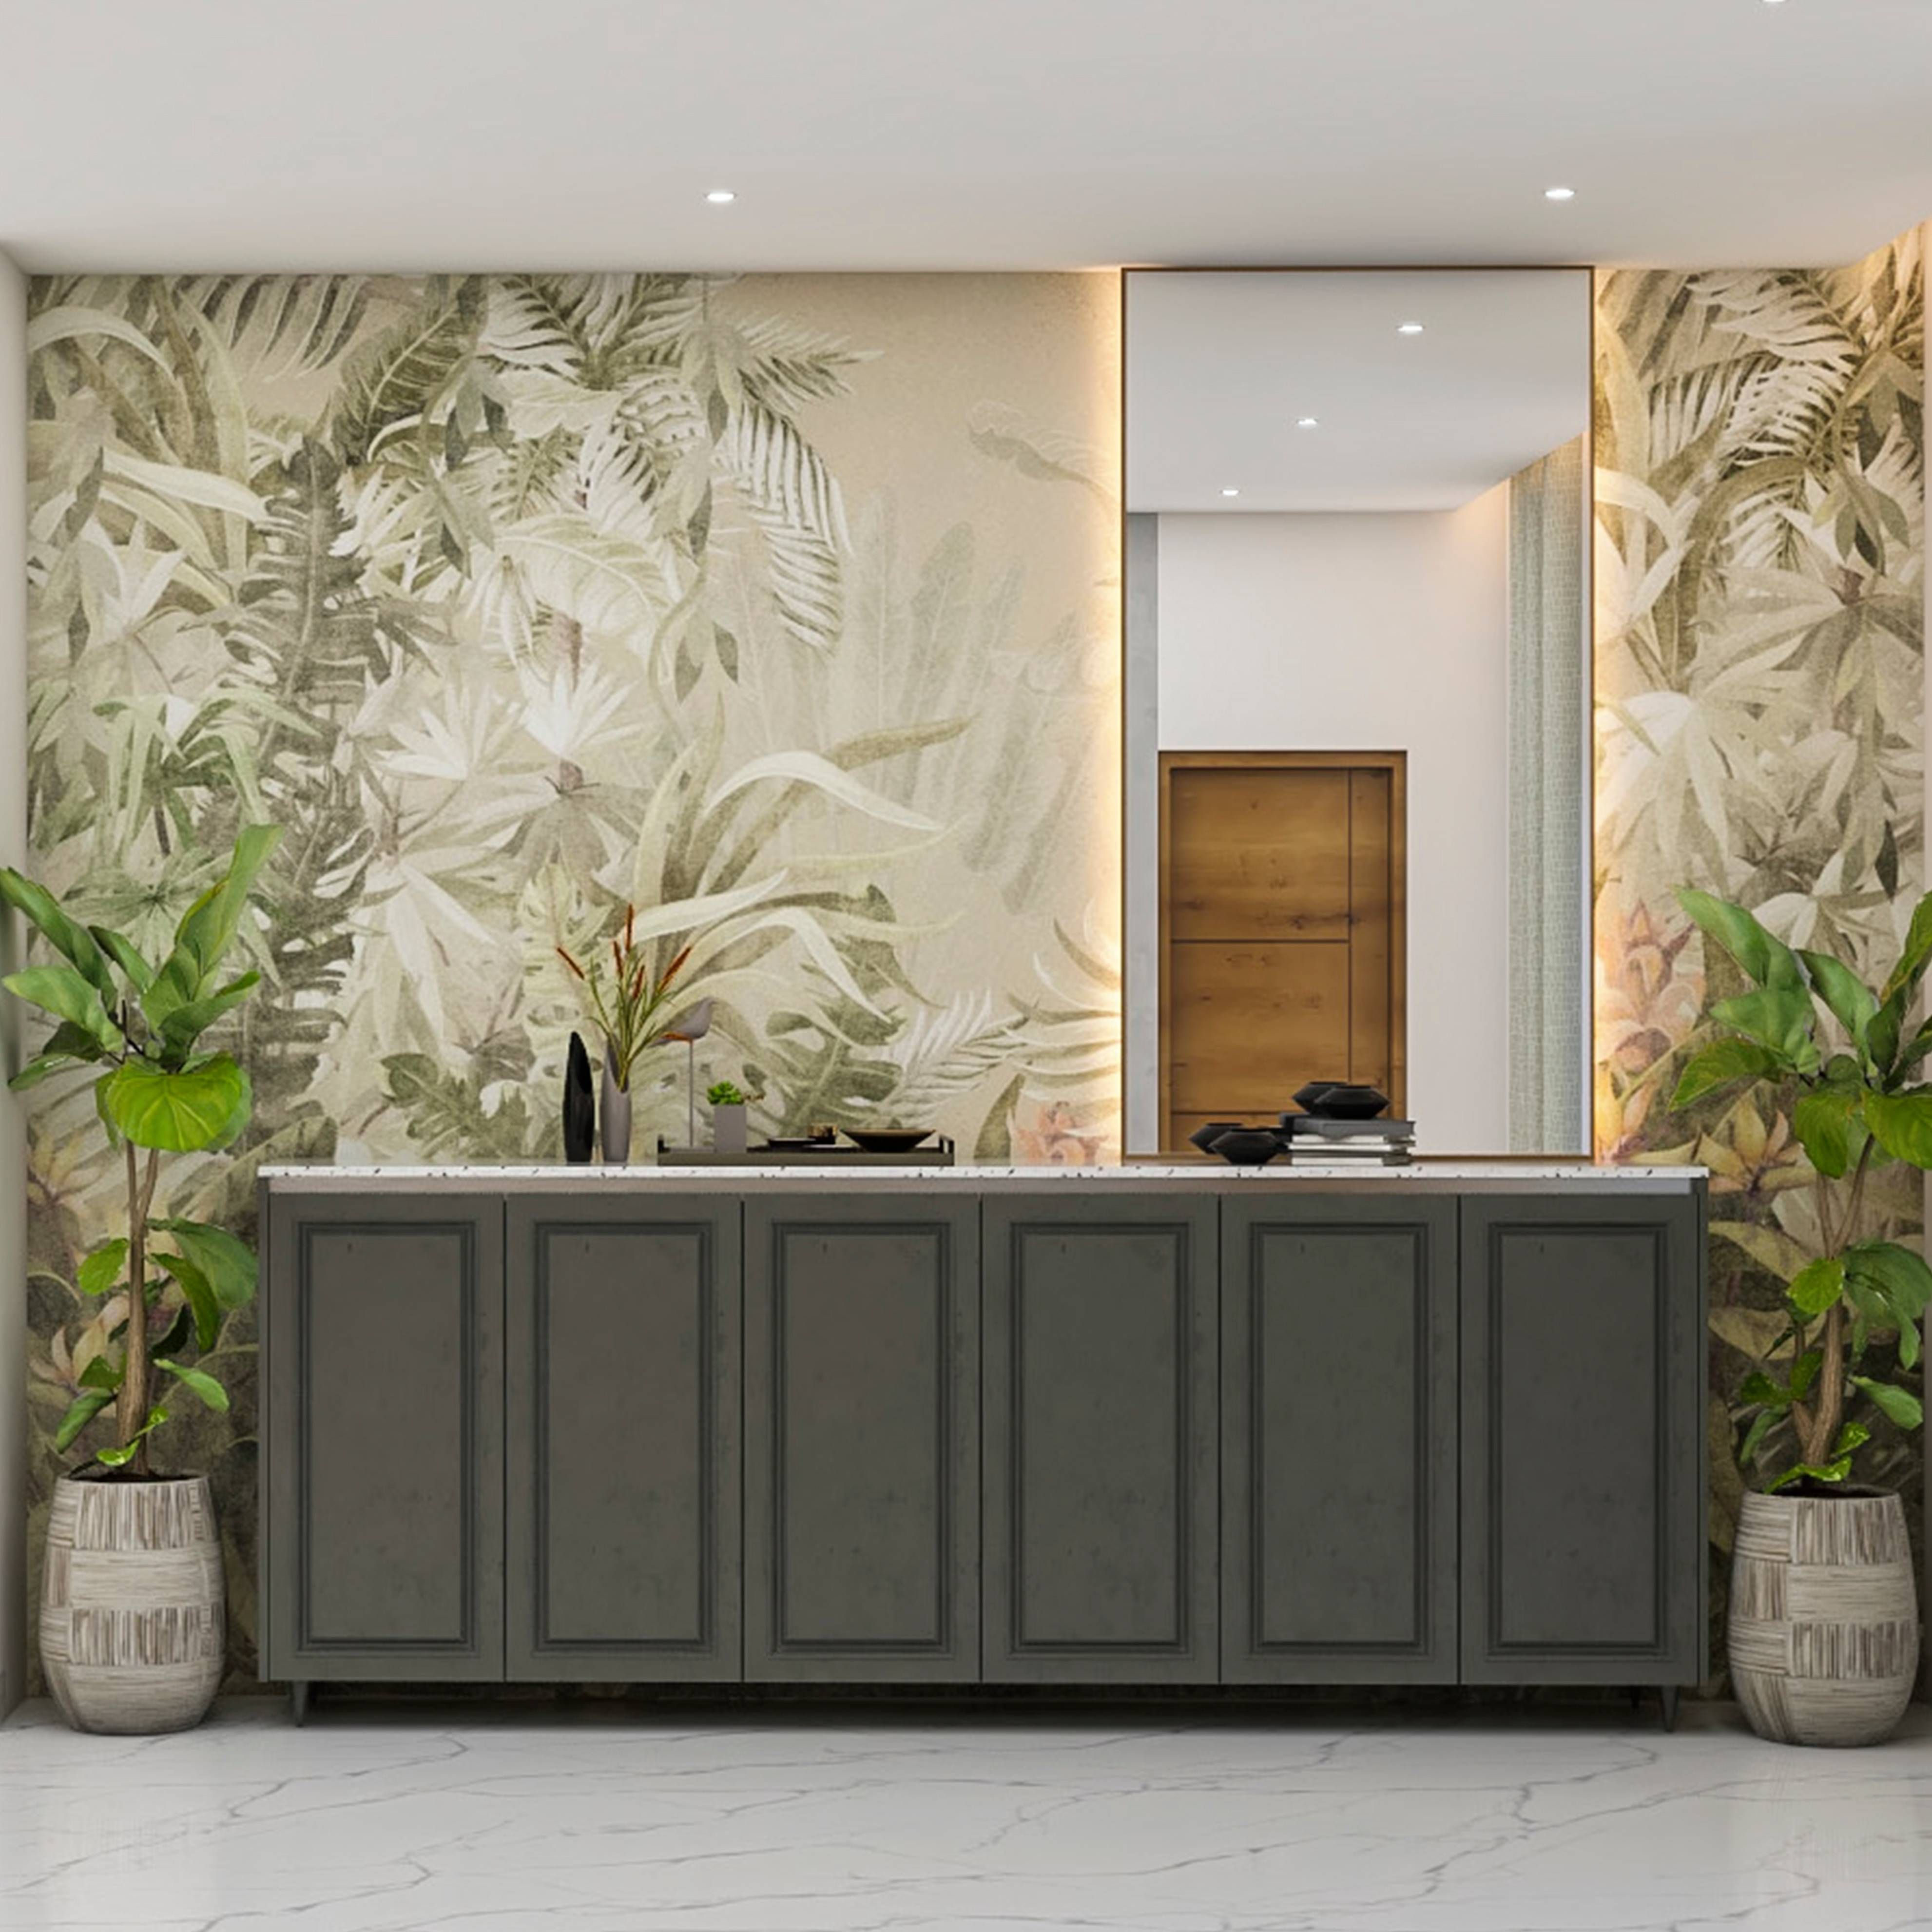 Contemporary Spacious Foyer Design With Planters